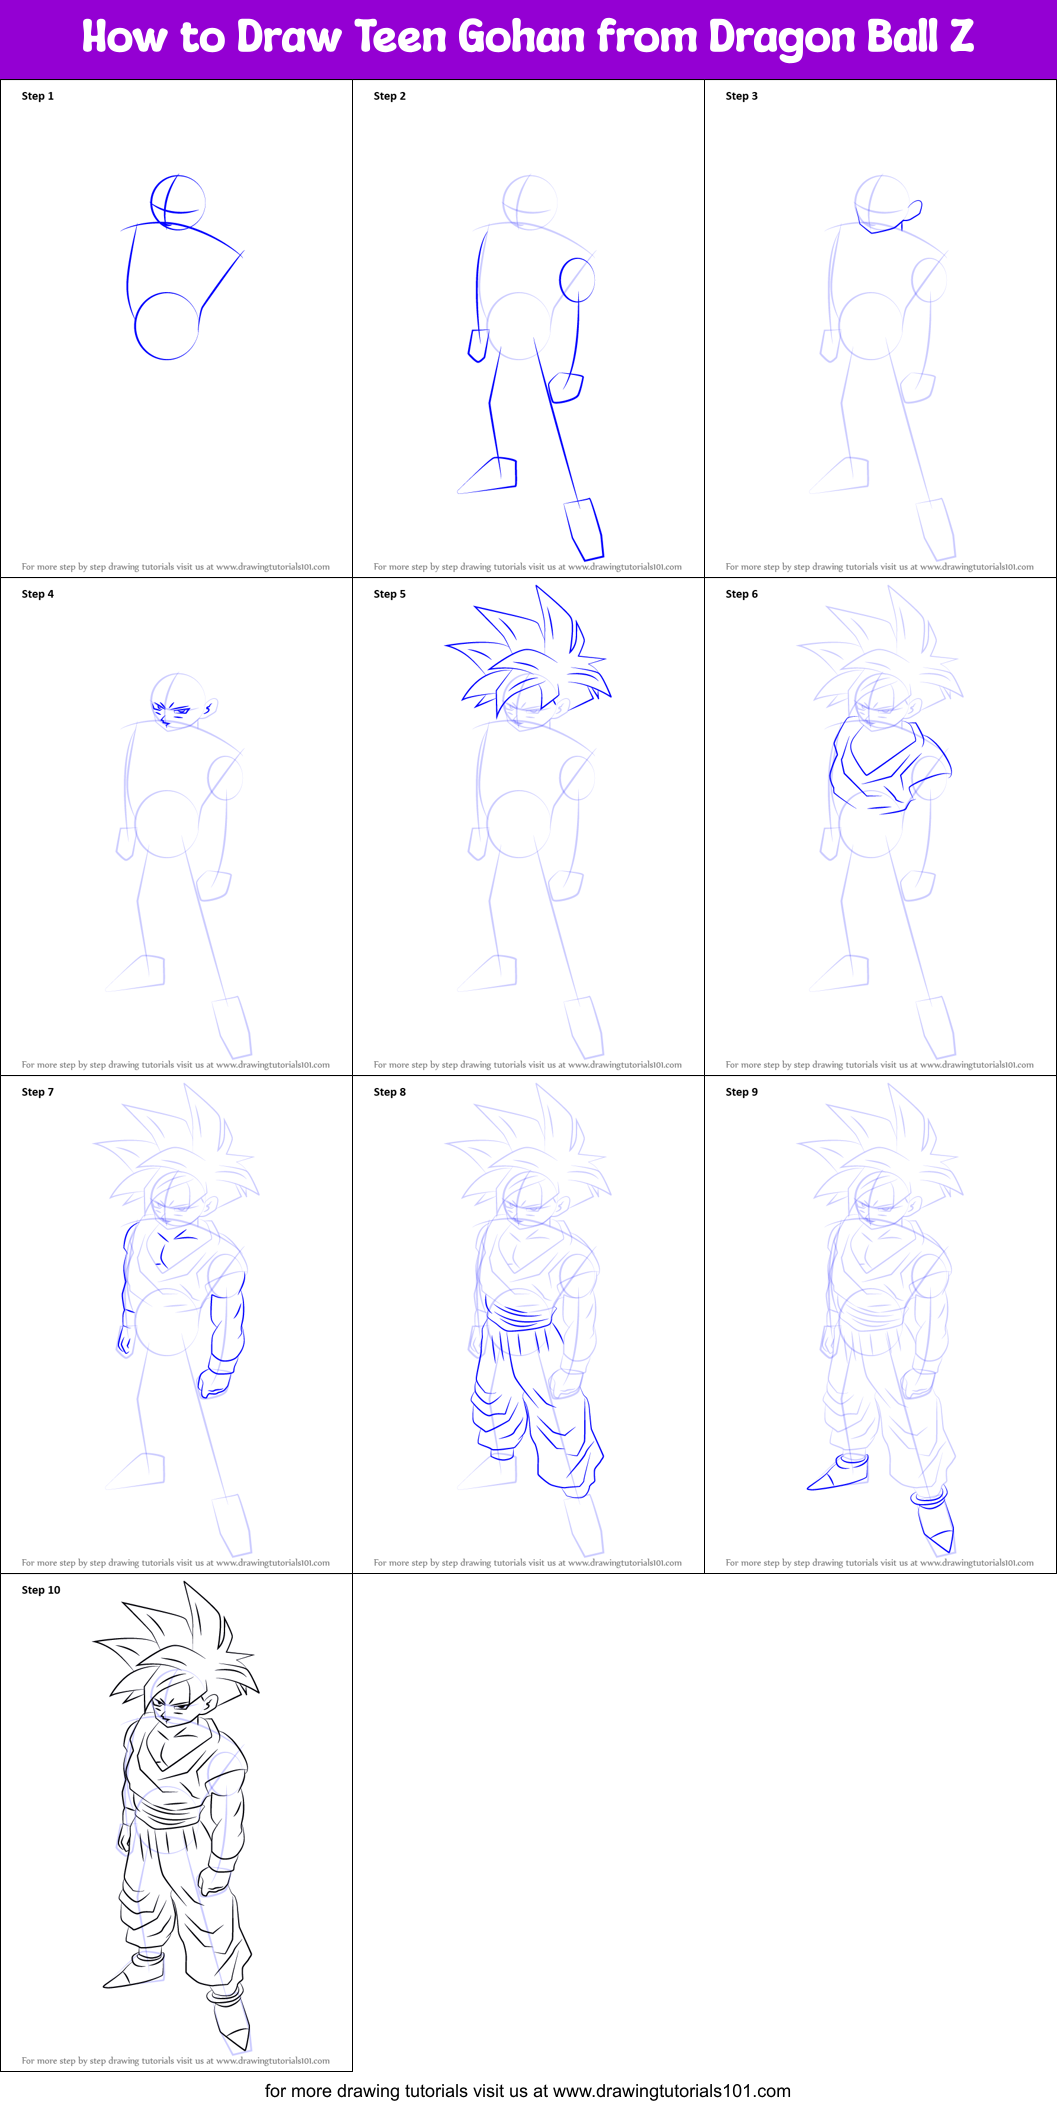 How To Draw Teen Gohan From Dragon Ball Z Printable Step By Step Drawing Sheet